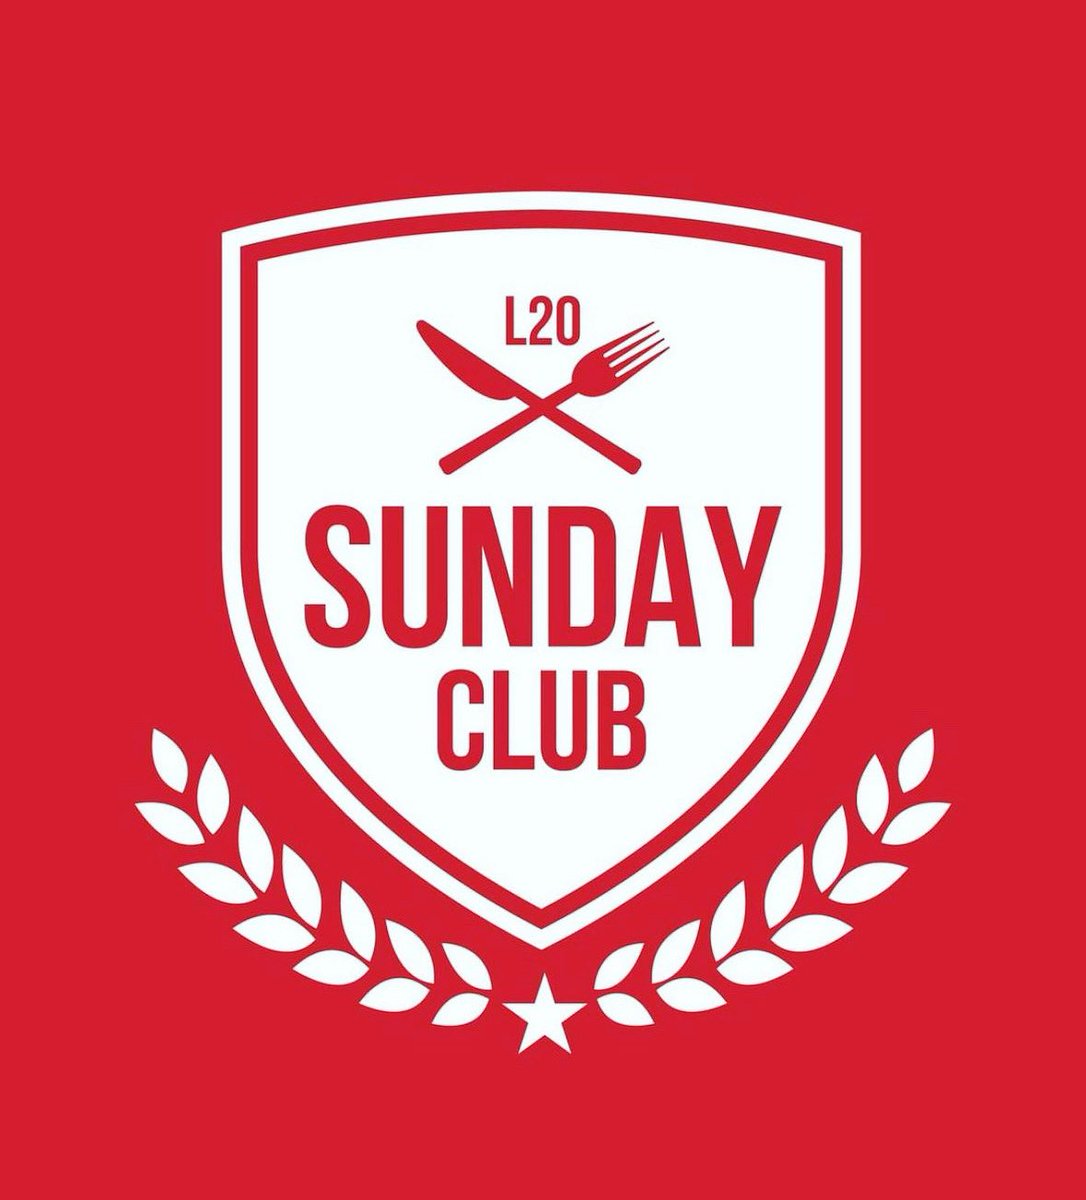 Our final Sunday Club of the academic year is here!! 🙌🏼Join us and our dedicated ‘Sunday Clubber’ students on Sunday 19th May for a delicious roast dinner 🍽️ To book please call on 0151 353 4518 or email Danielle.cox@hughbaird.ac.uk